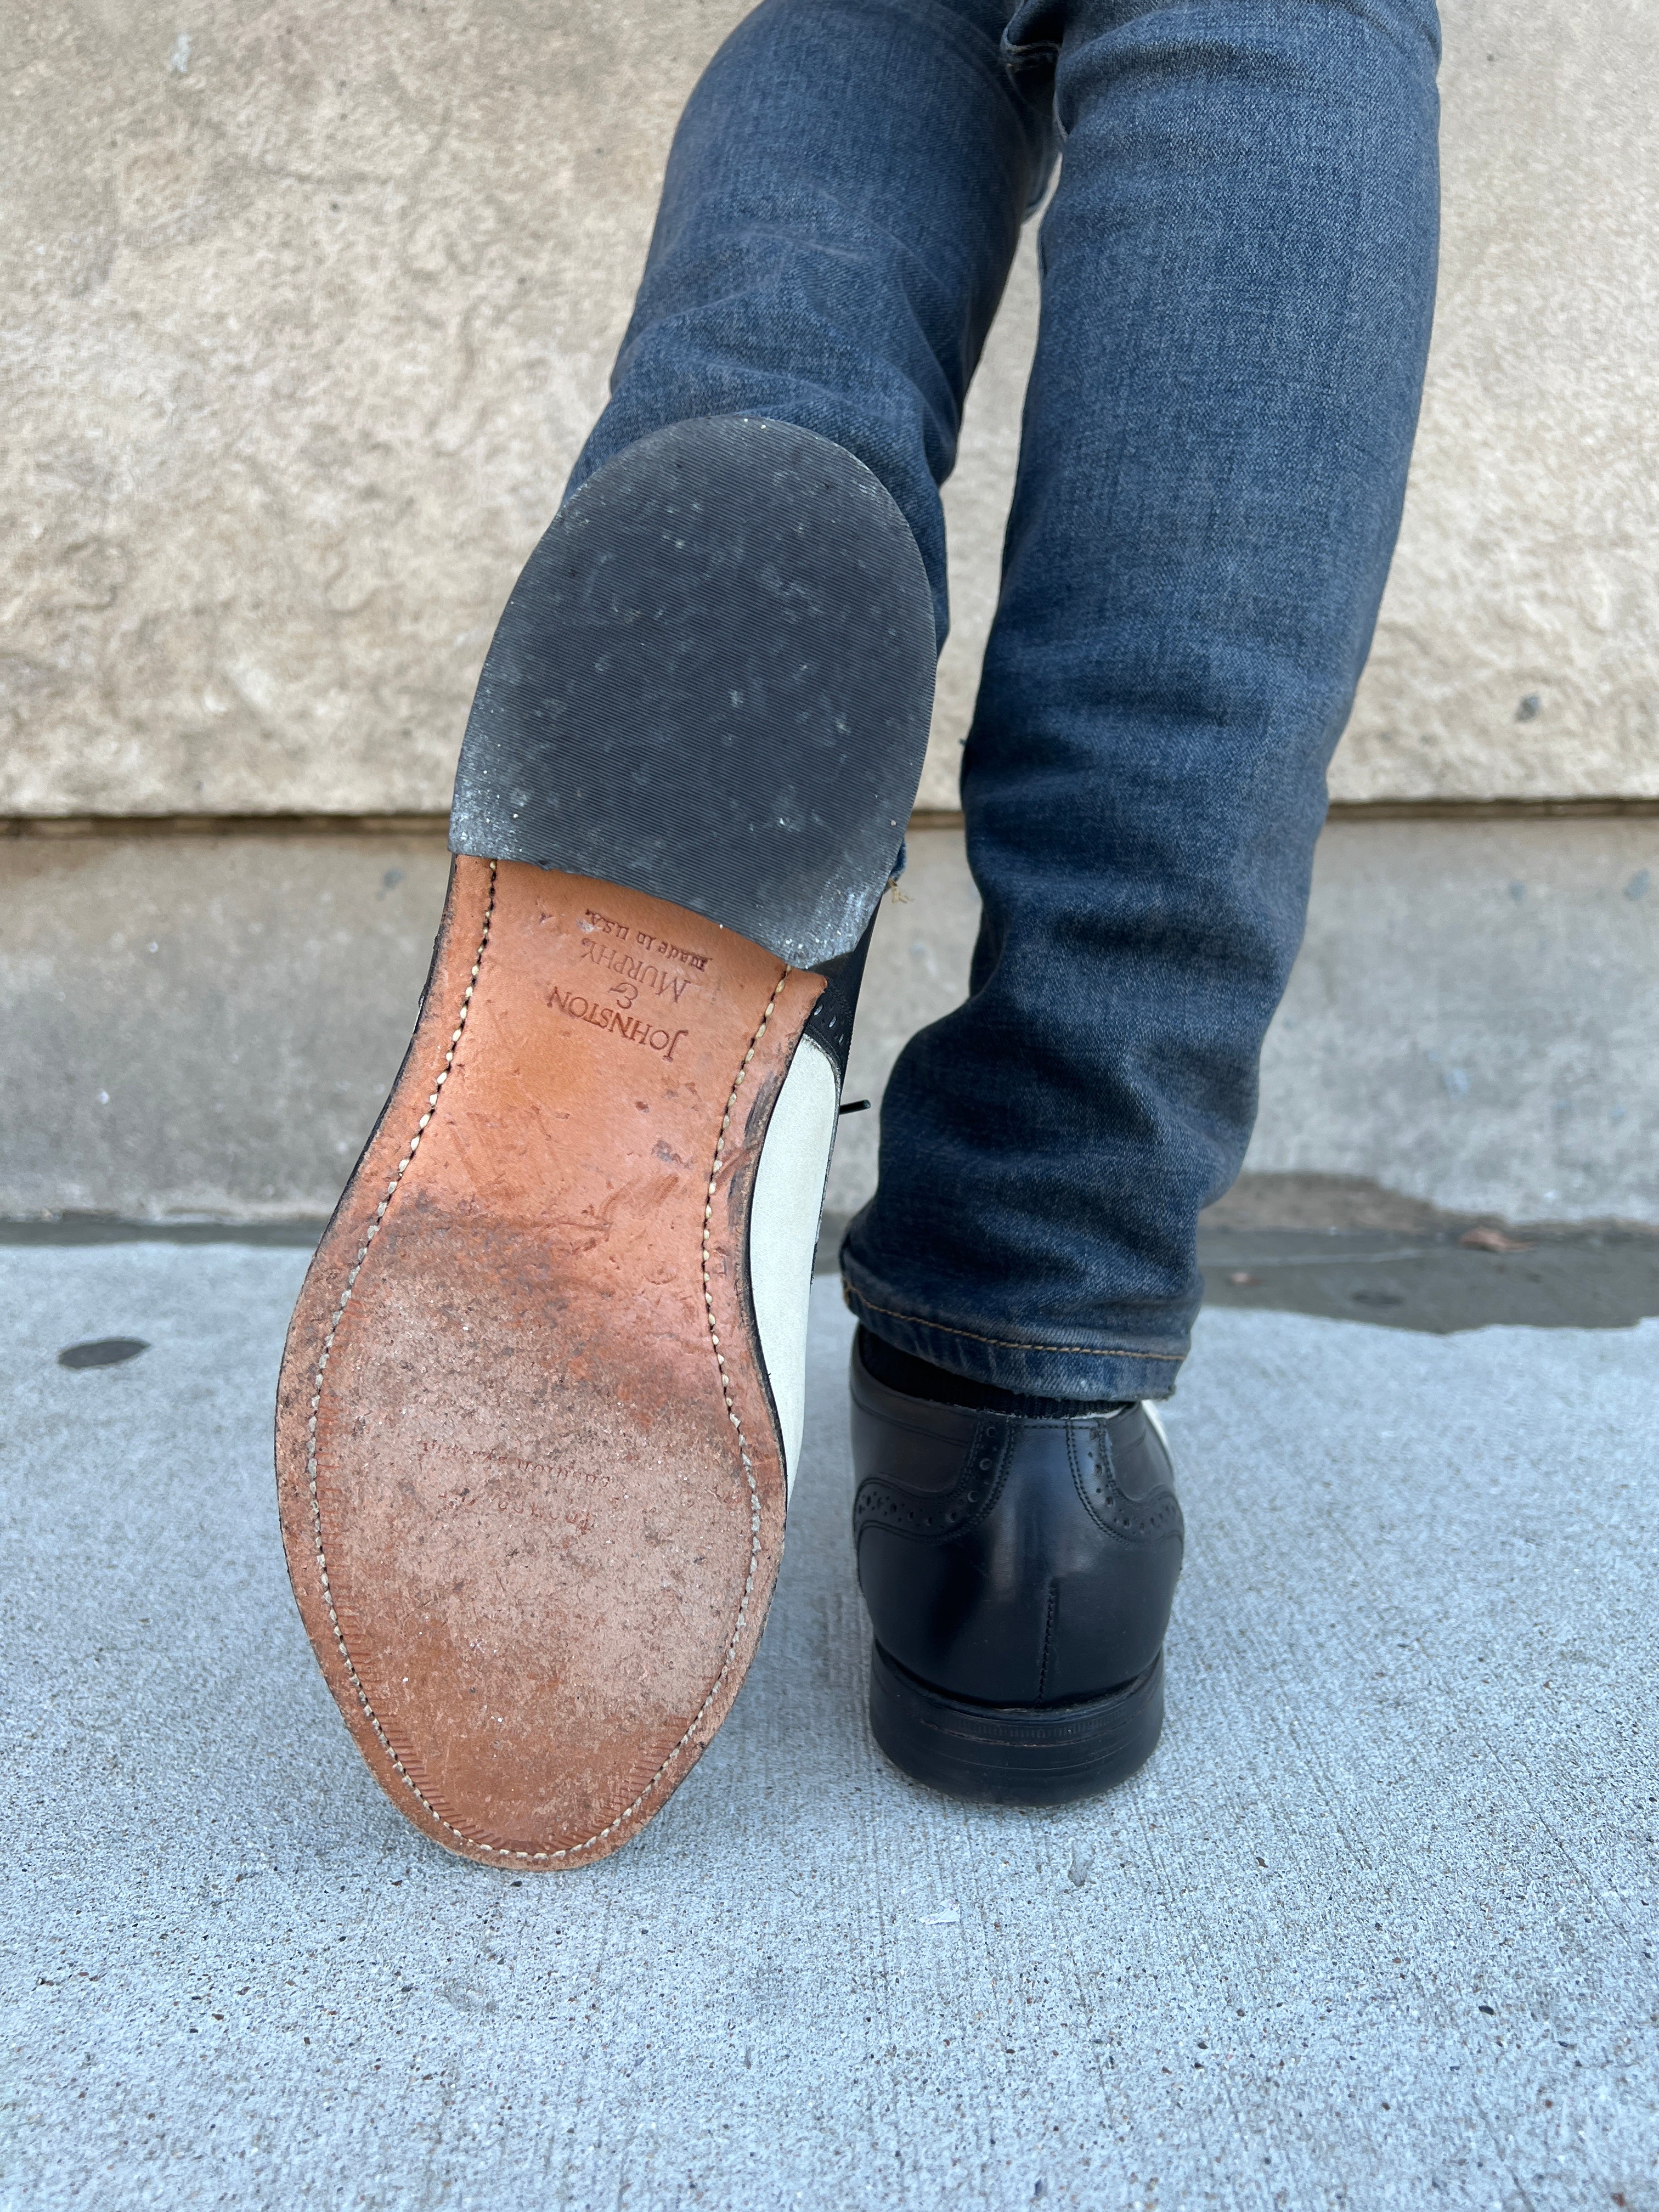 Johnston & Murphy Review 2023 → The Best Shoes for Cozy and Stylish Look!